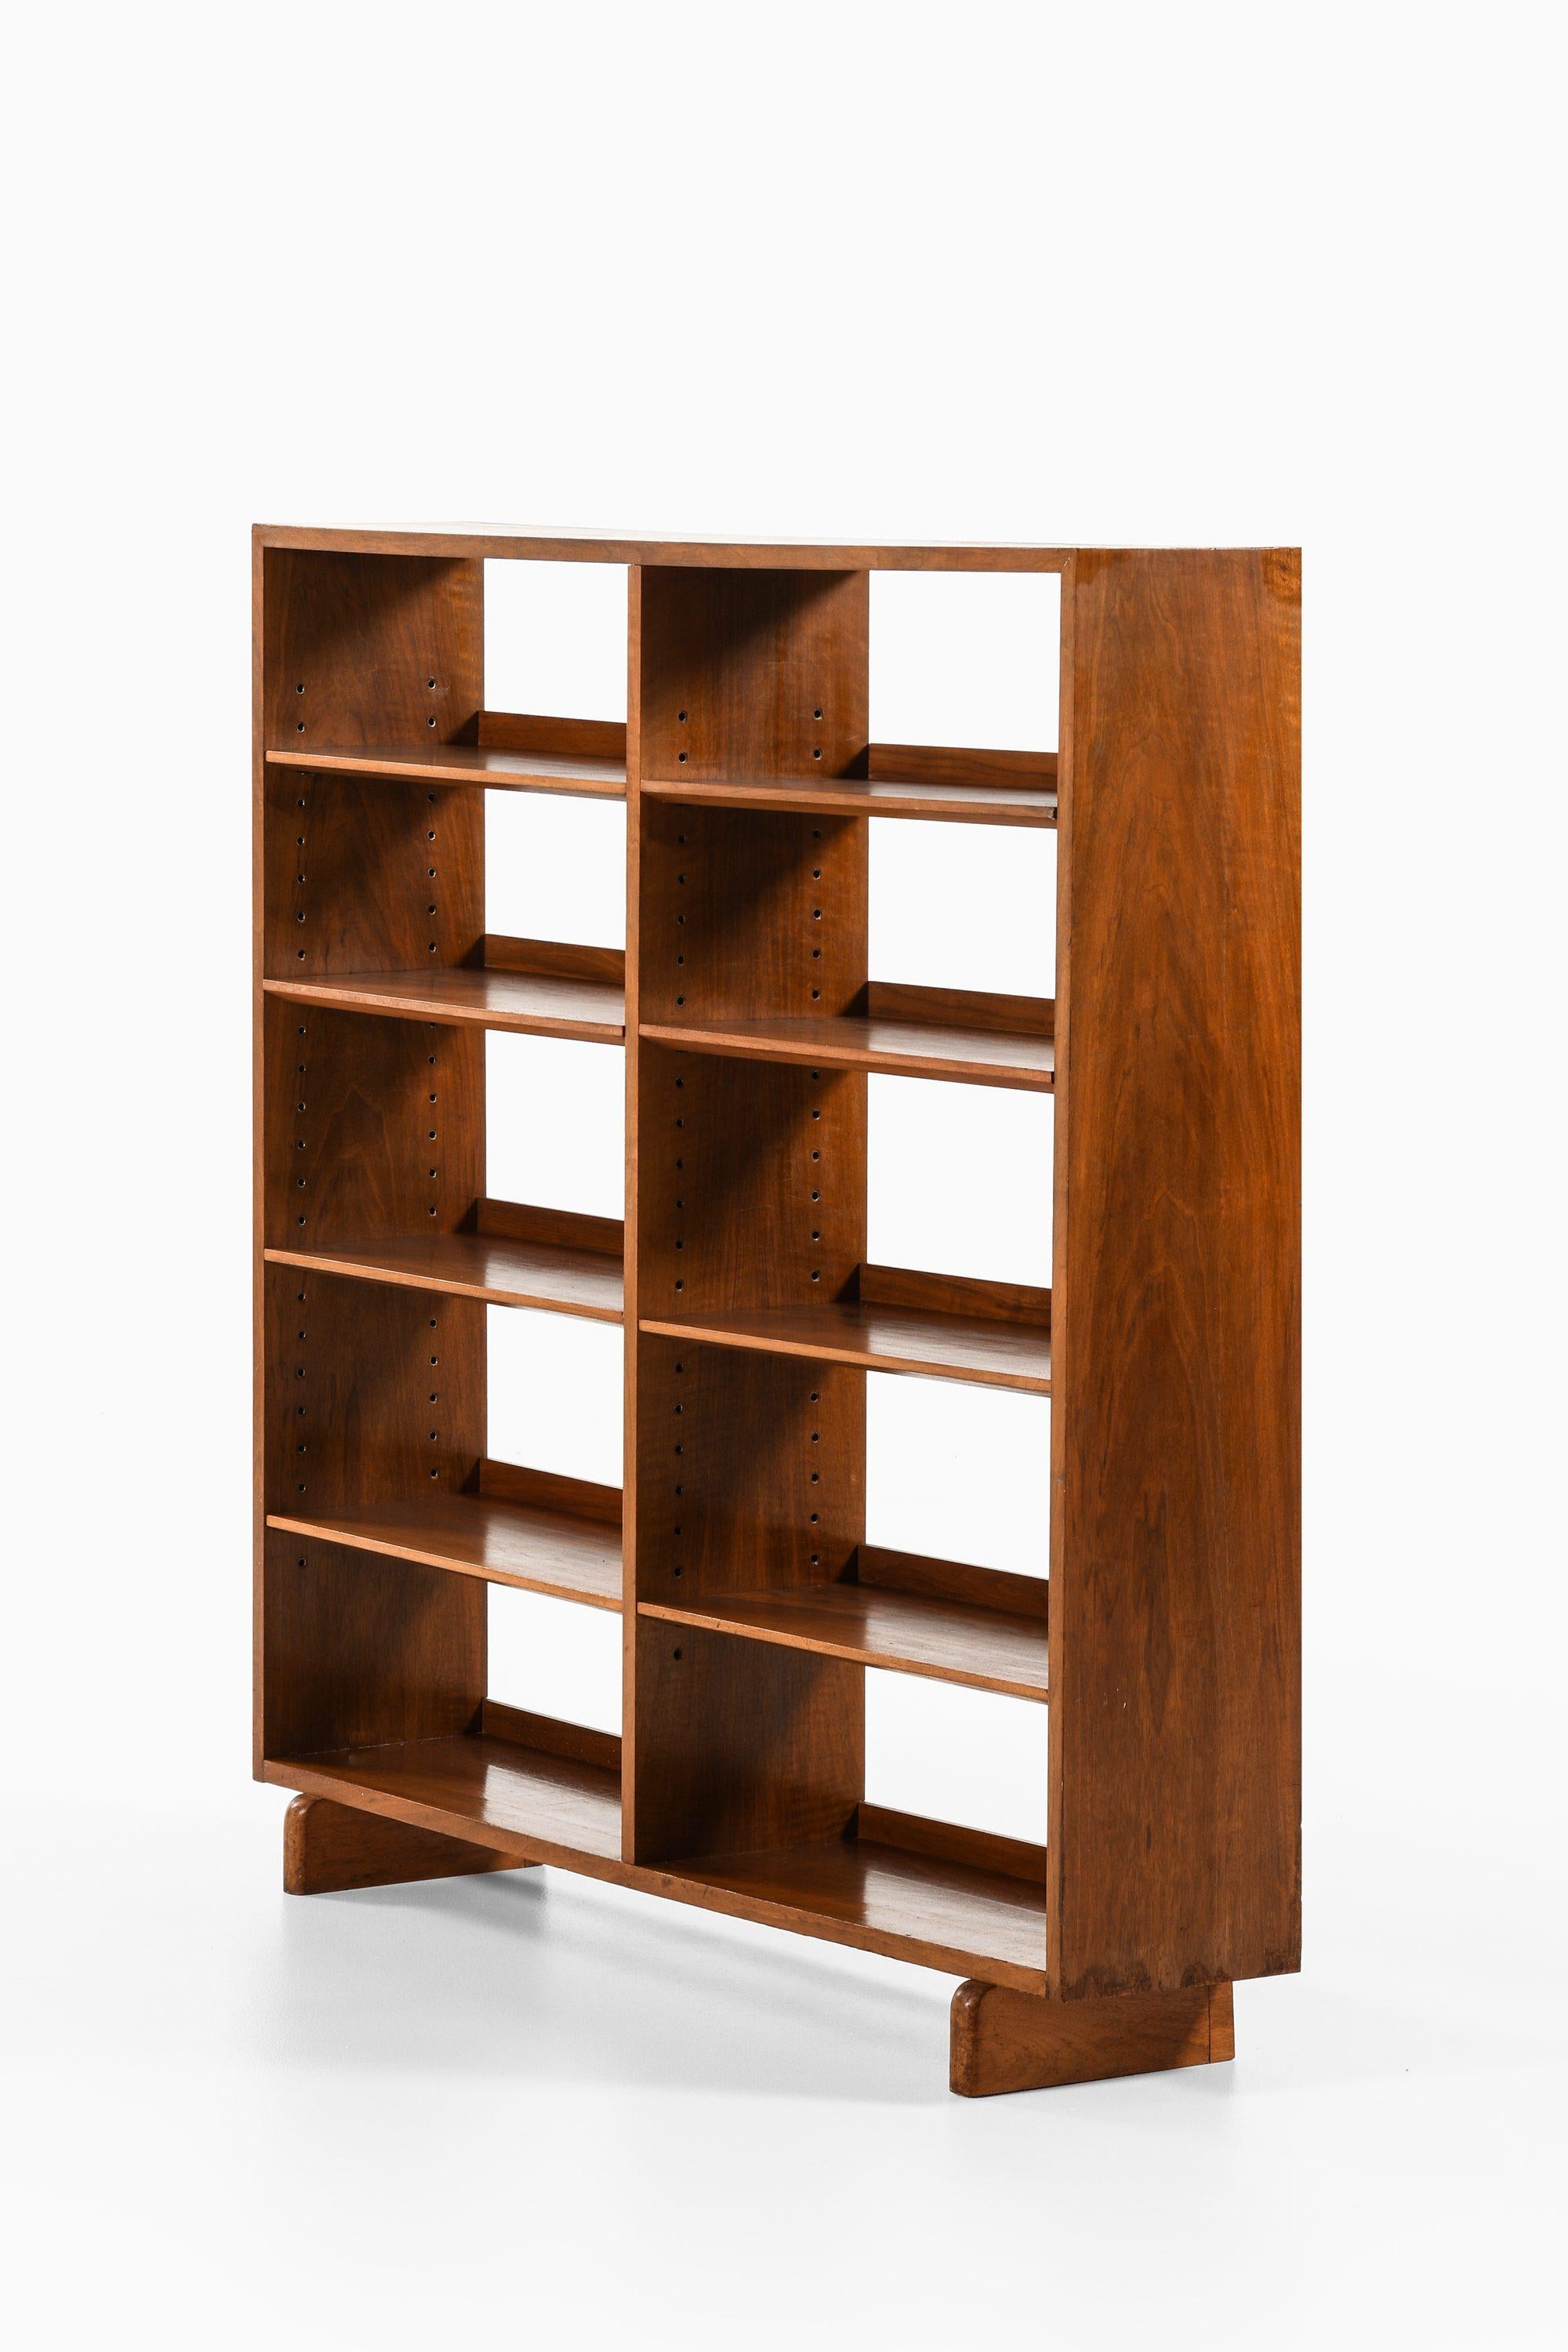 Rare Freestanding Bookcase in Mahogany by Josef Frank, 1940's

Additional Information:
Material: Mahogany
Style: Mid century, Scandinavia
Produced by Svenskt Tenn in Sweden
Dimensions (W x D x H): 140 x 28 x 141.5 cm
Condition: Good vintage